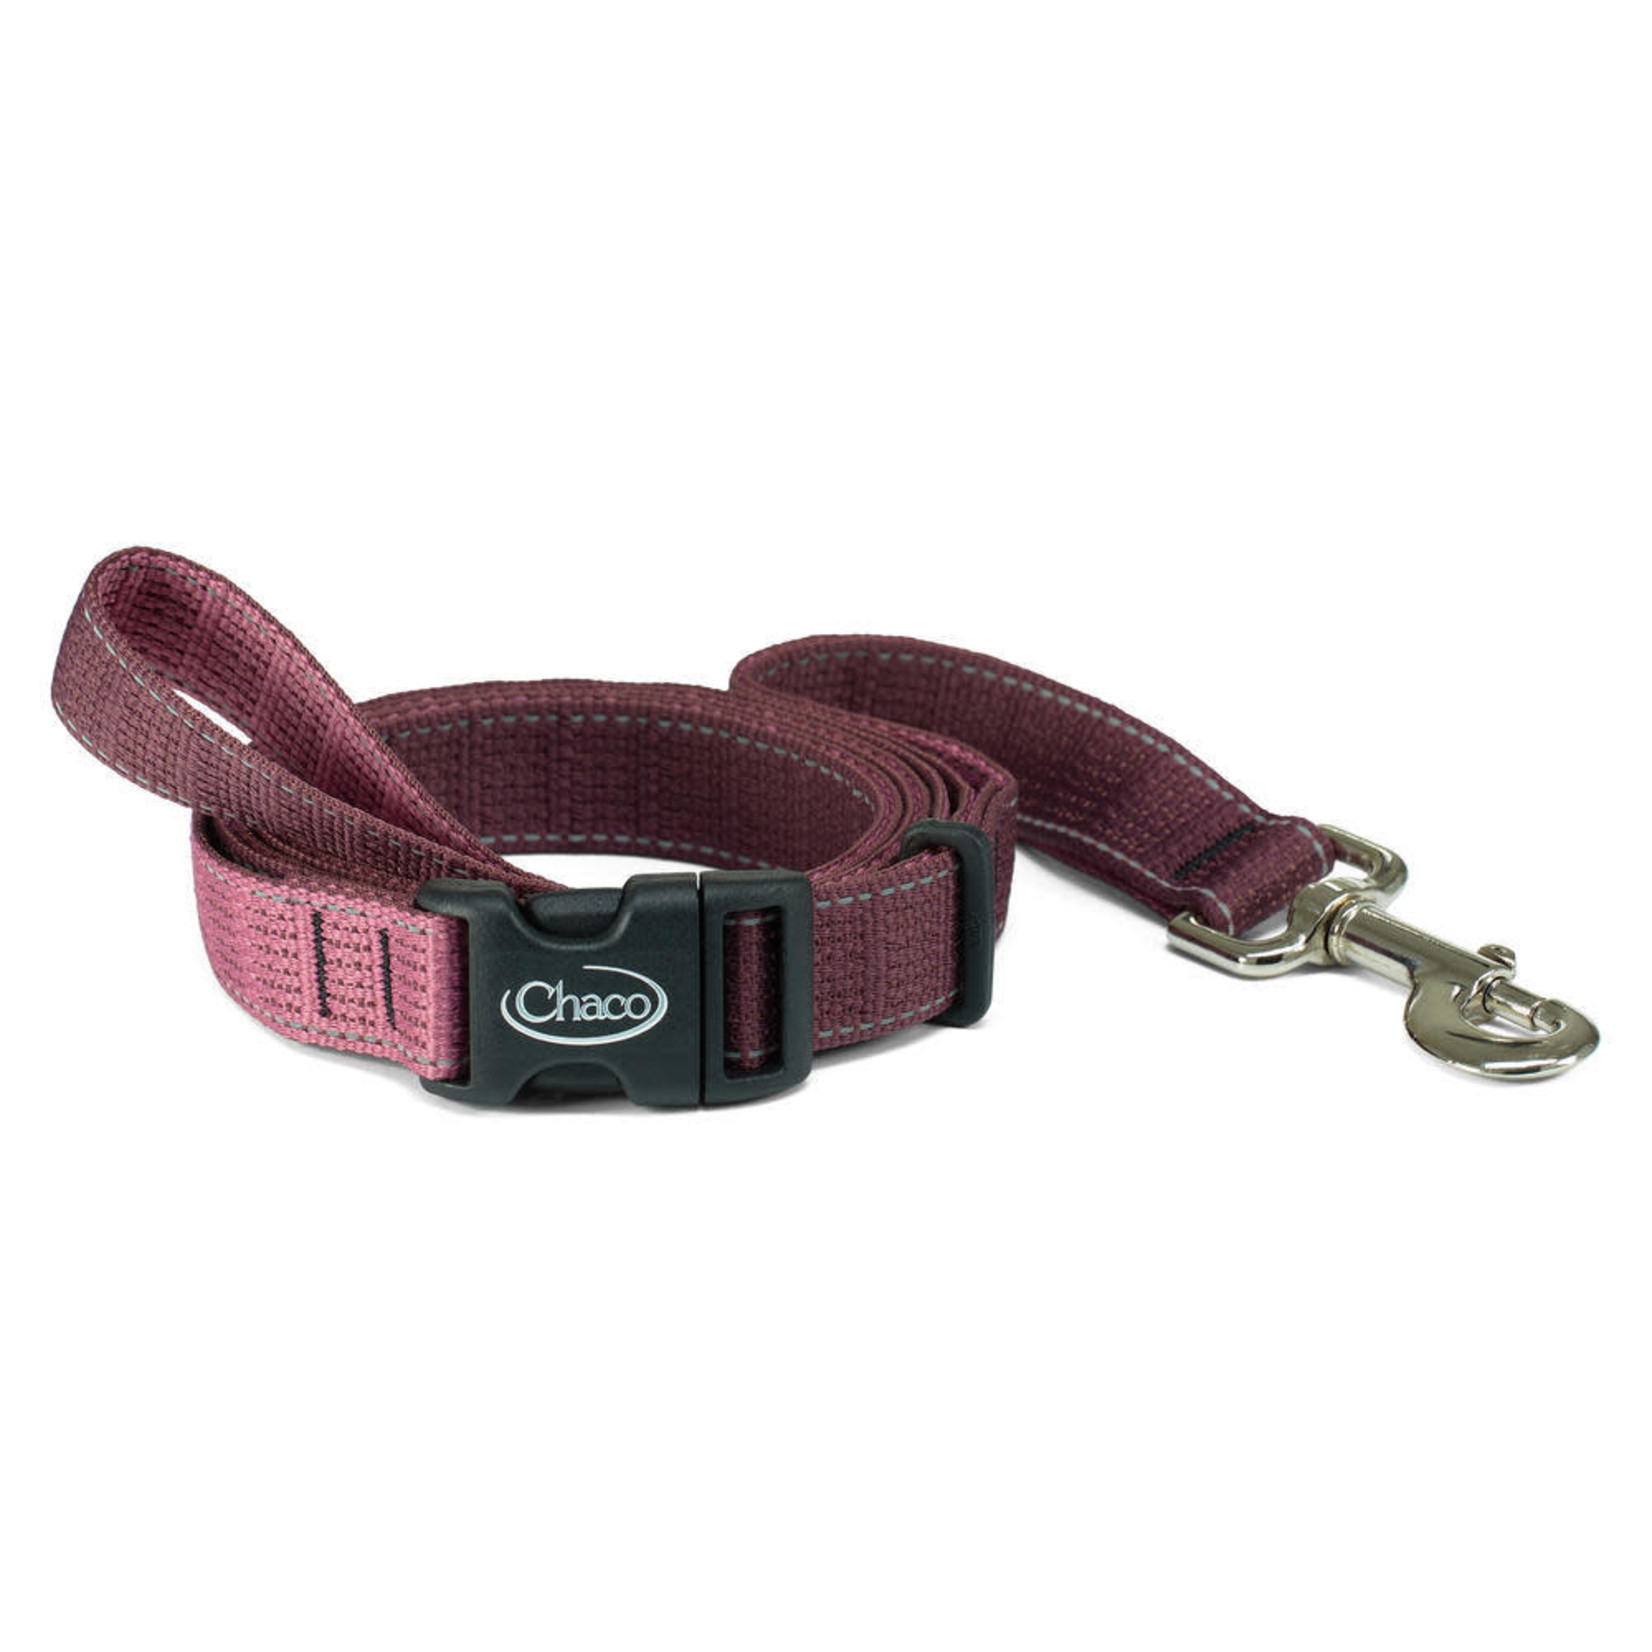 Chaco Chaco Dog Leashes